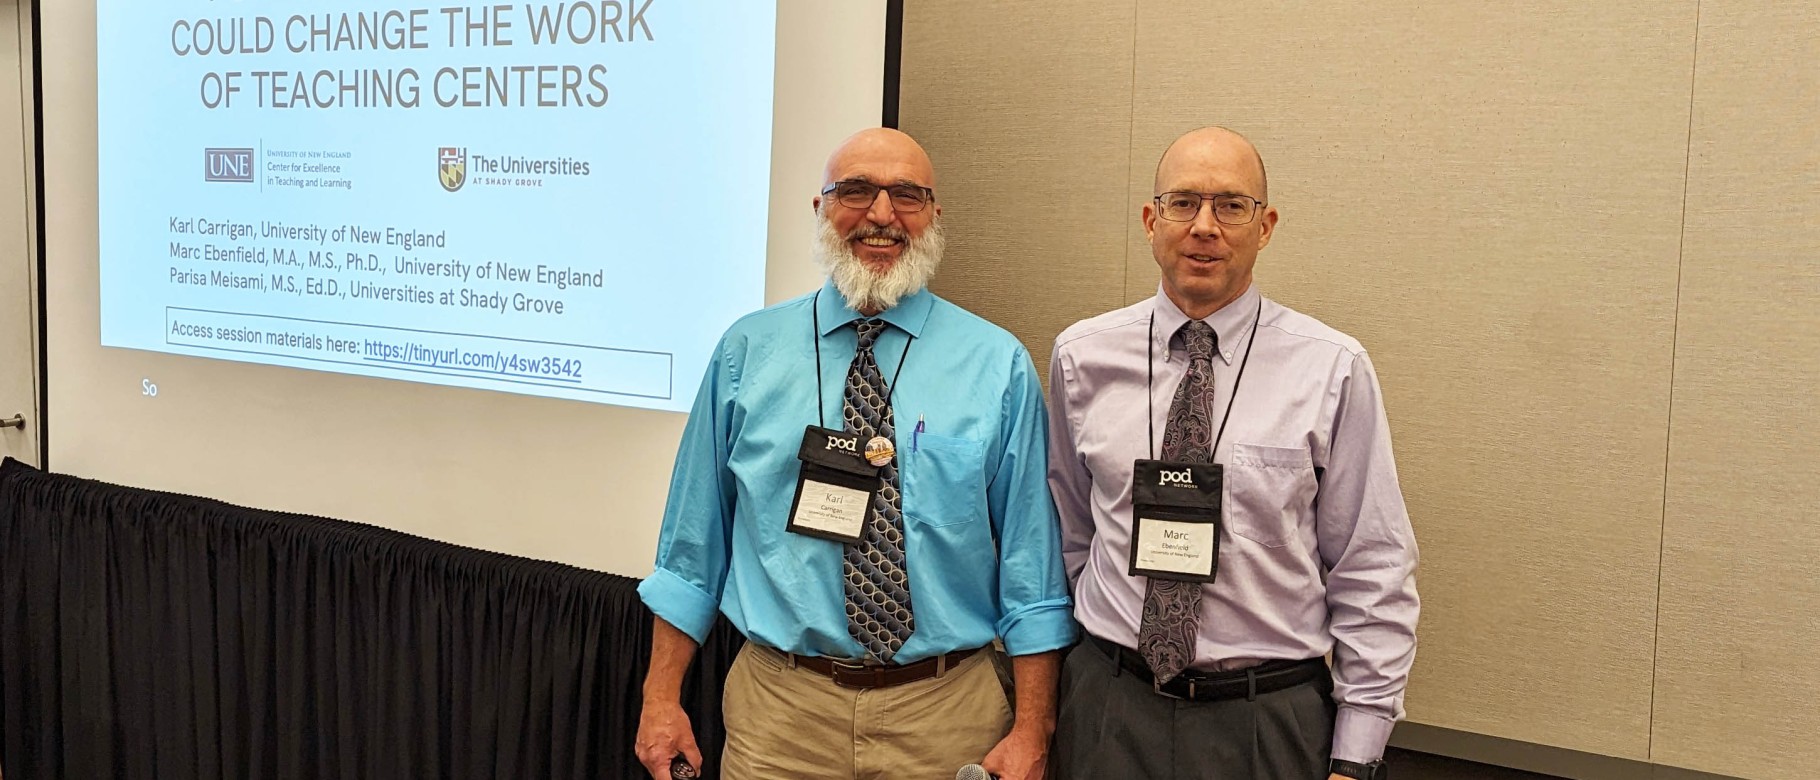 CETL's Karl Carrigan and Marc Ebenfield pose in front of a slideshow presentation at a conference